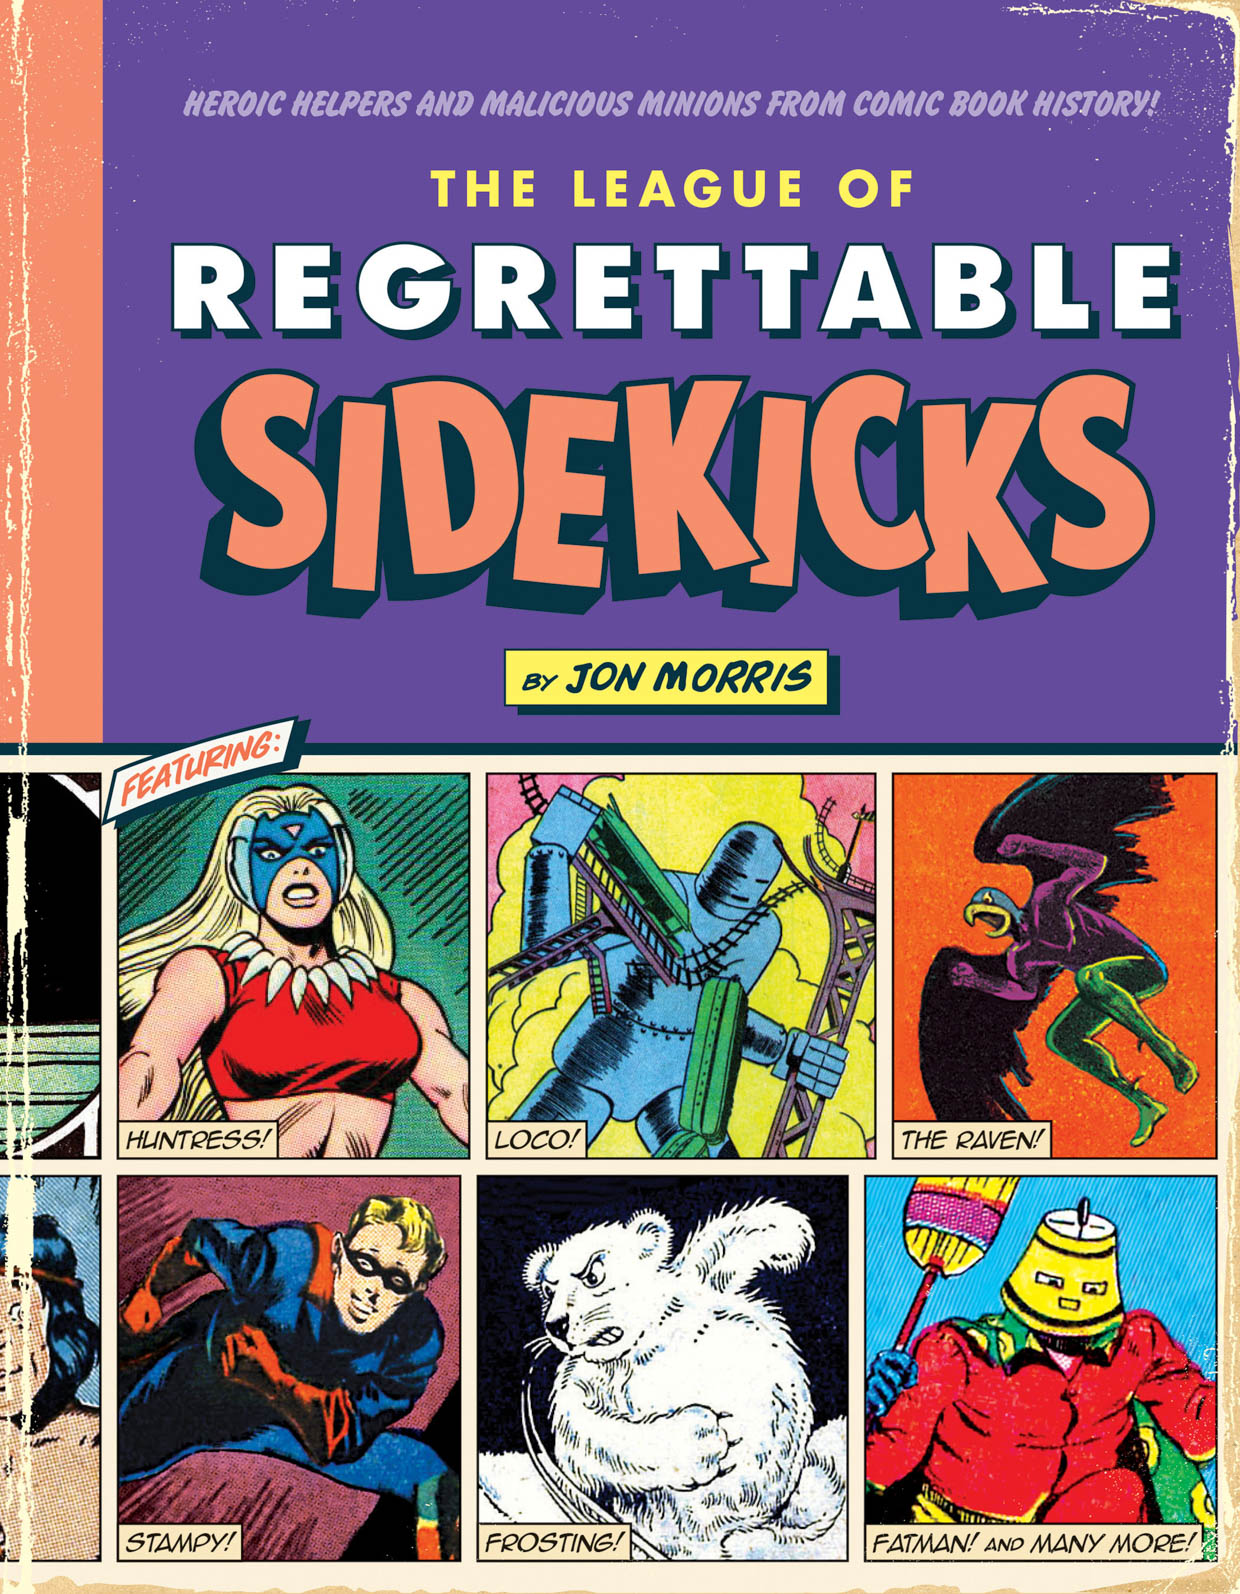 The League of Regrettable Comic Book Characters